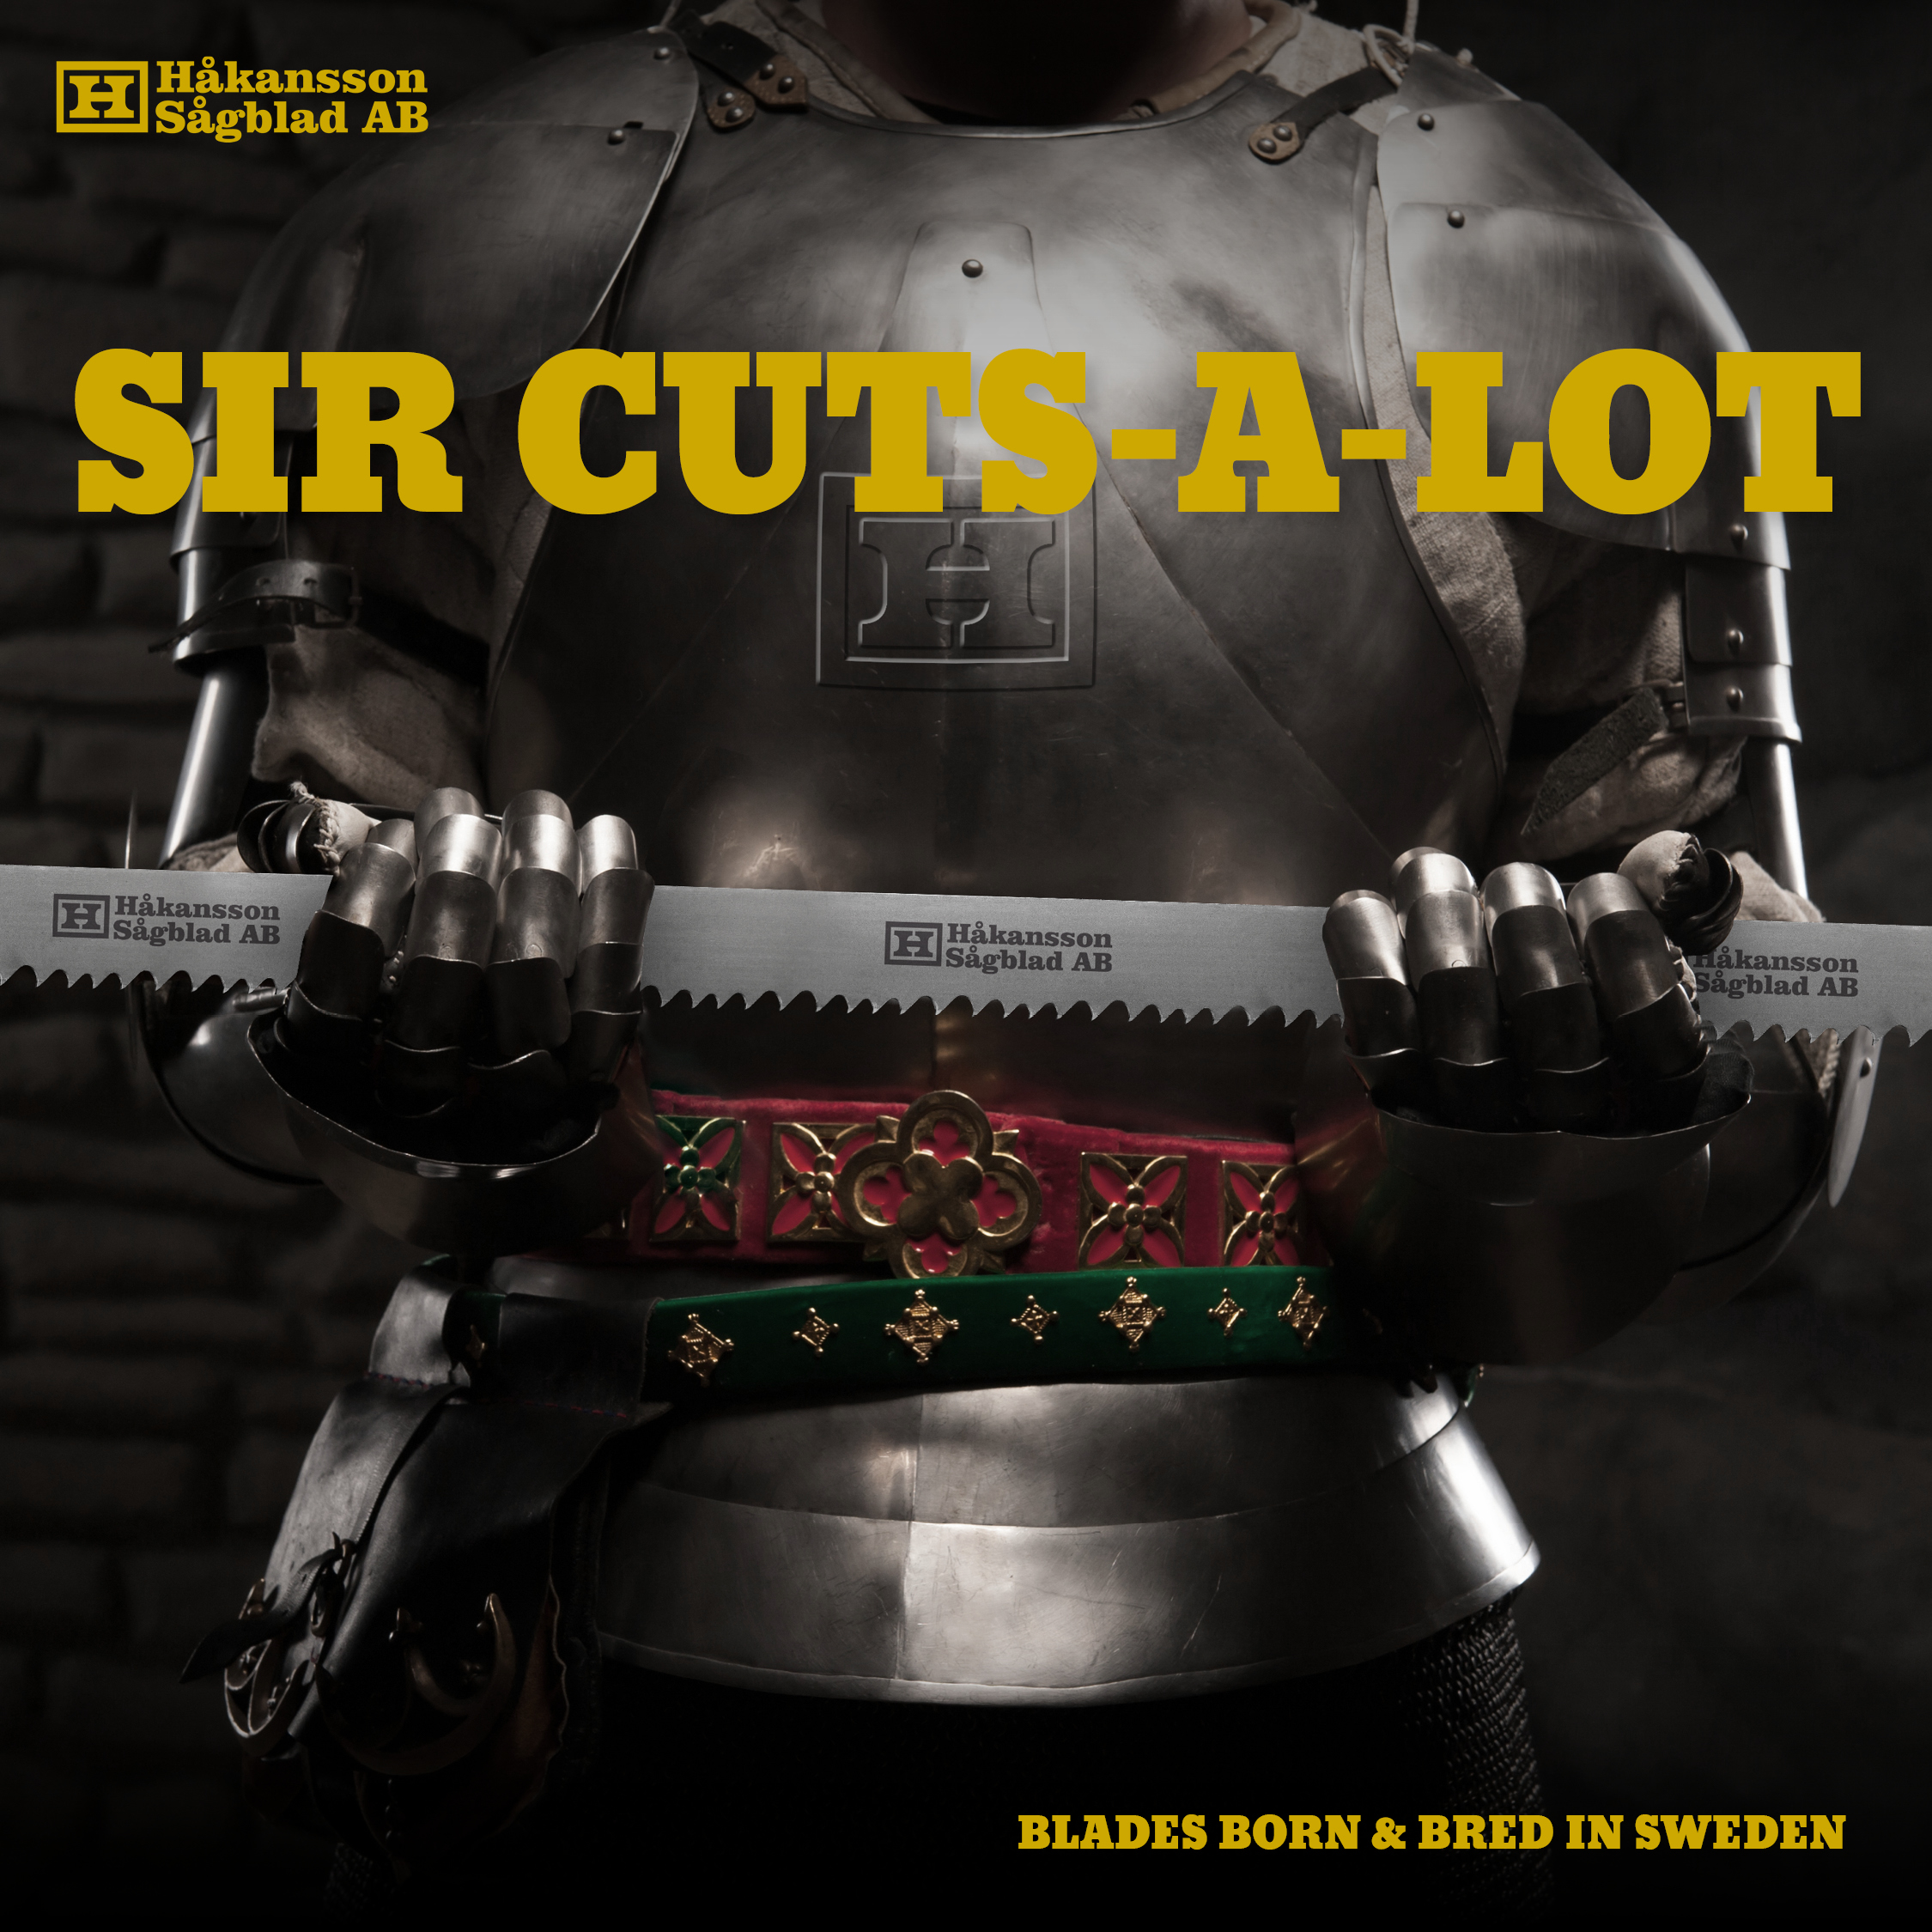 Advert SIR CUTS-A-LOT, knight in armour with sawblade